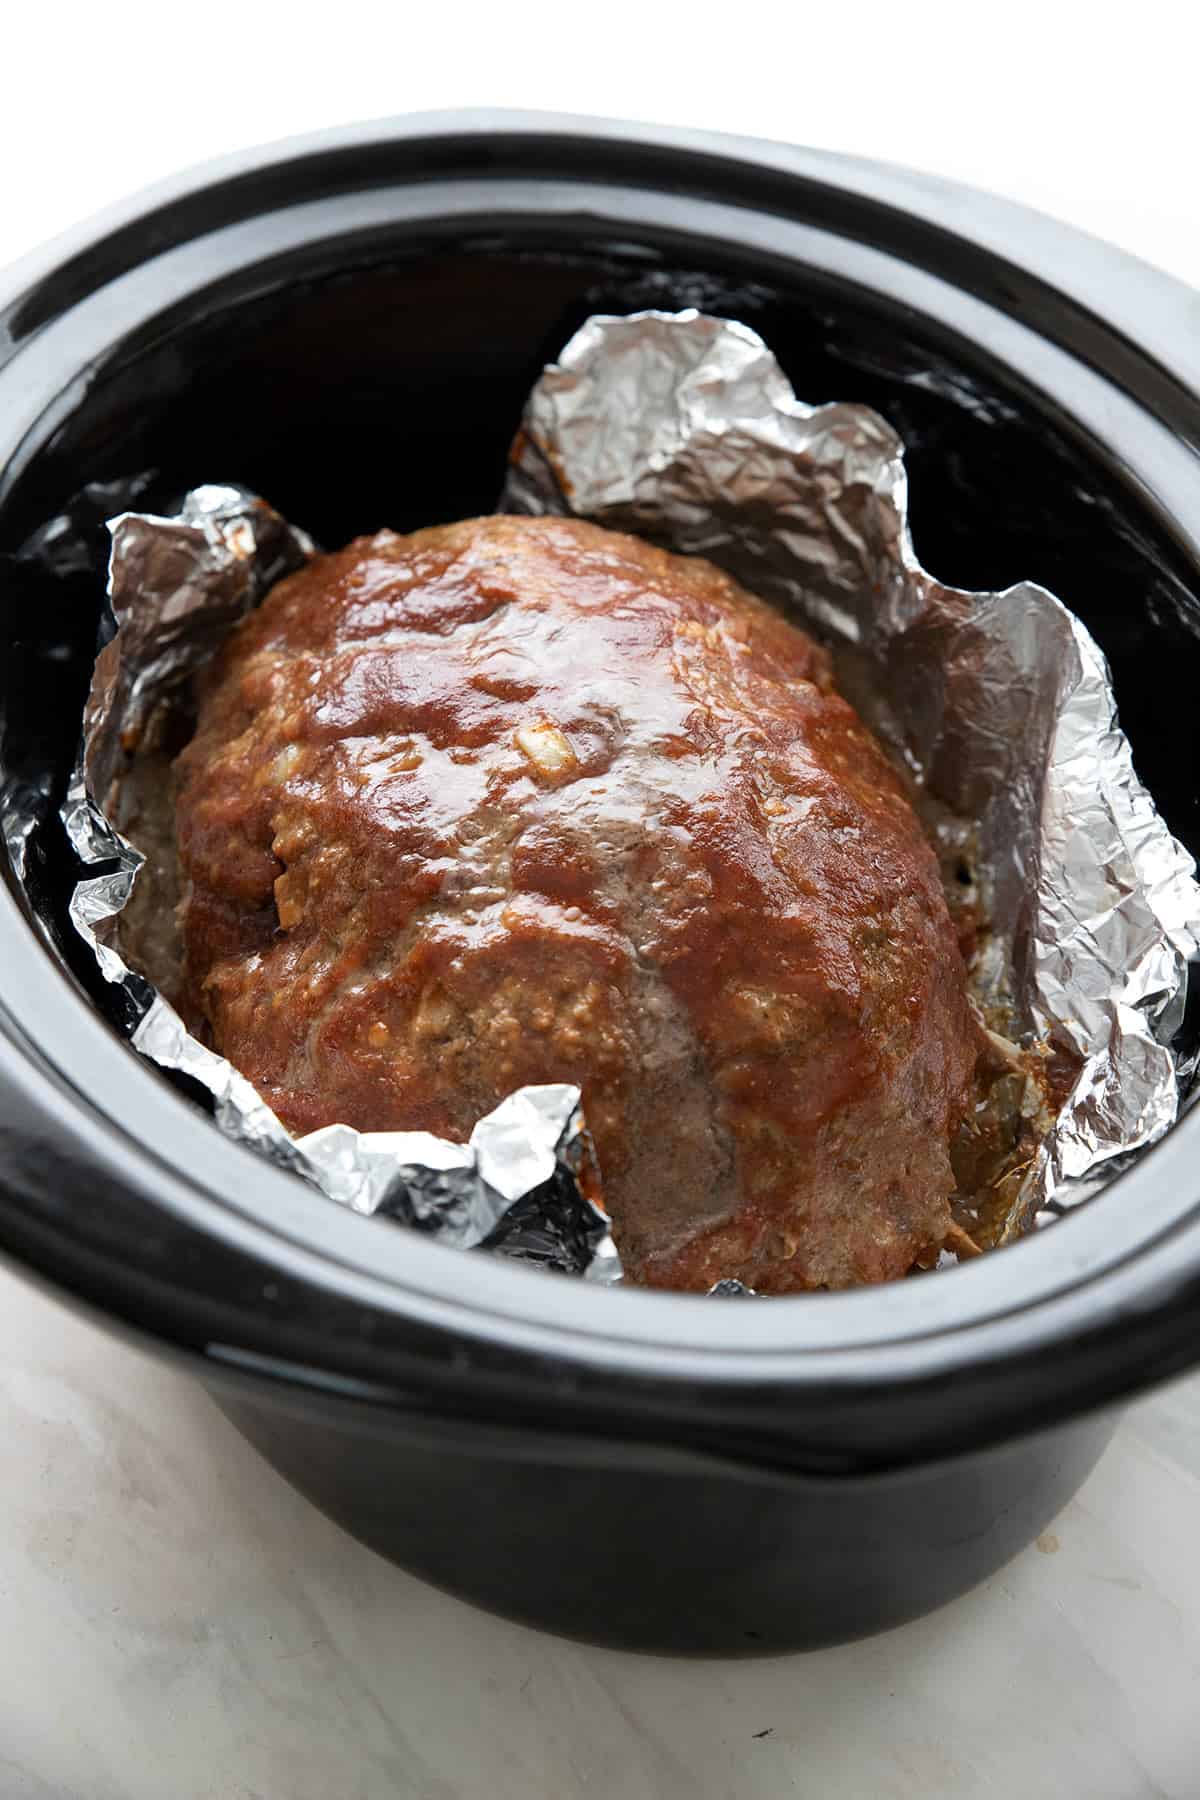 Keto meatloaf with bbq sauce in a crockpot lined with foil.